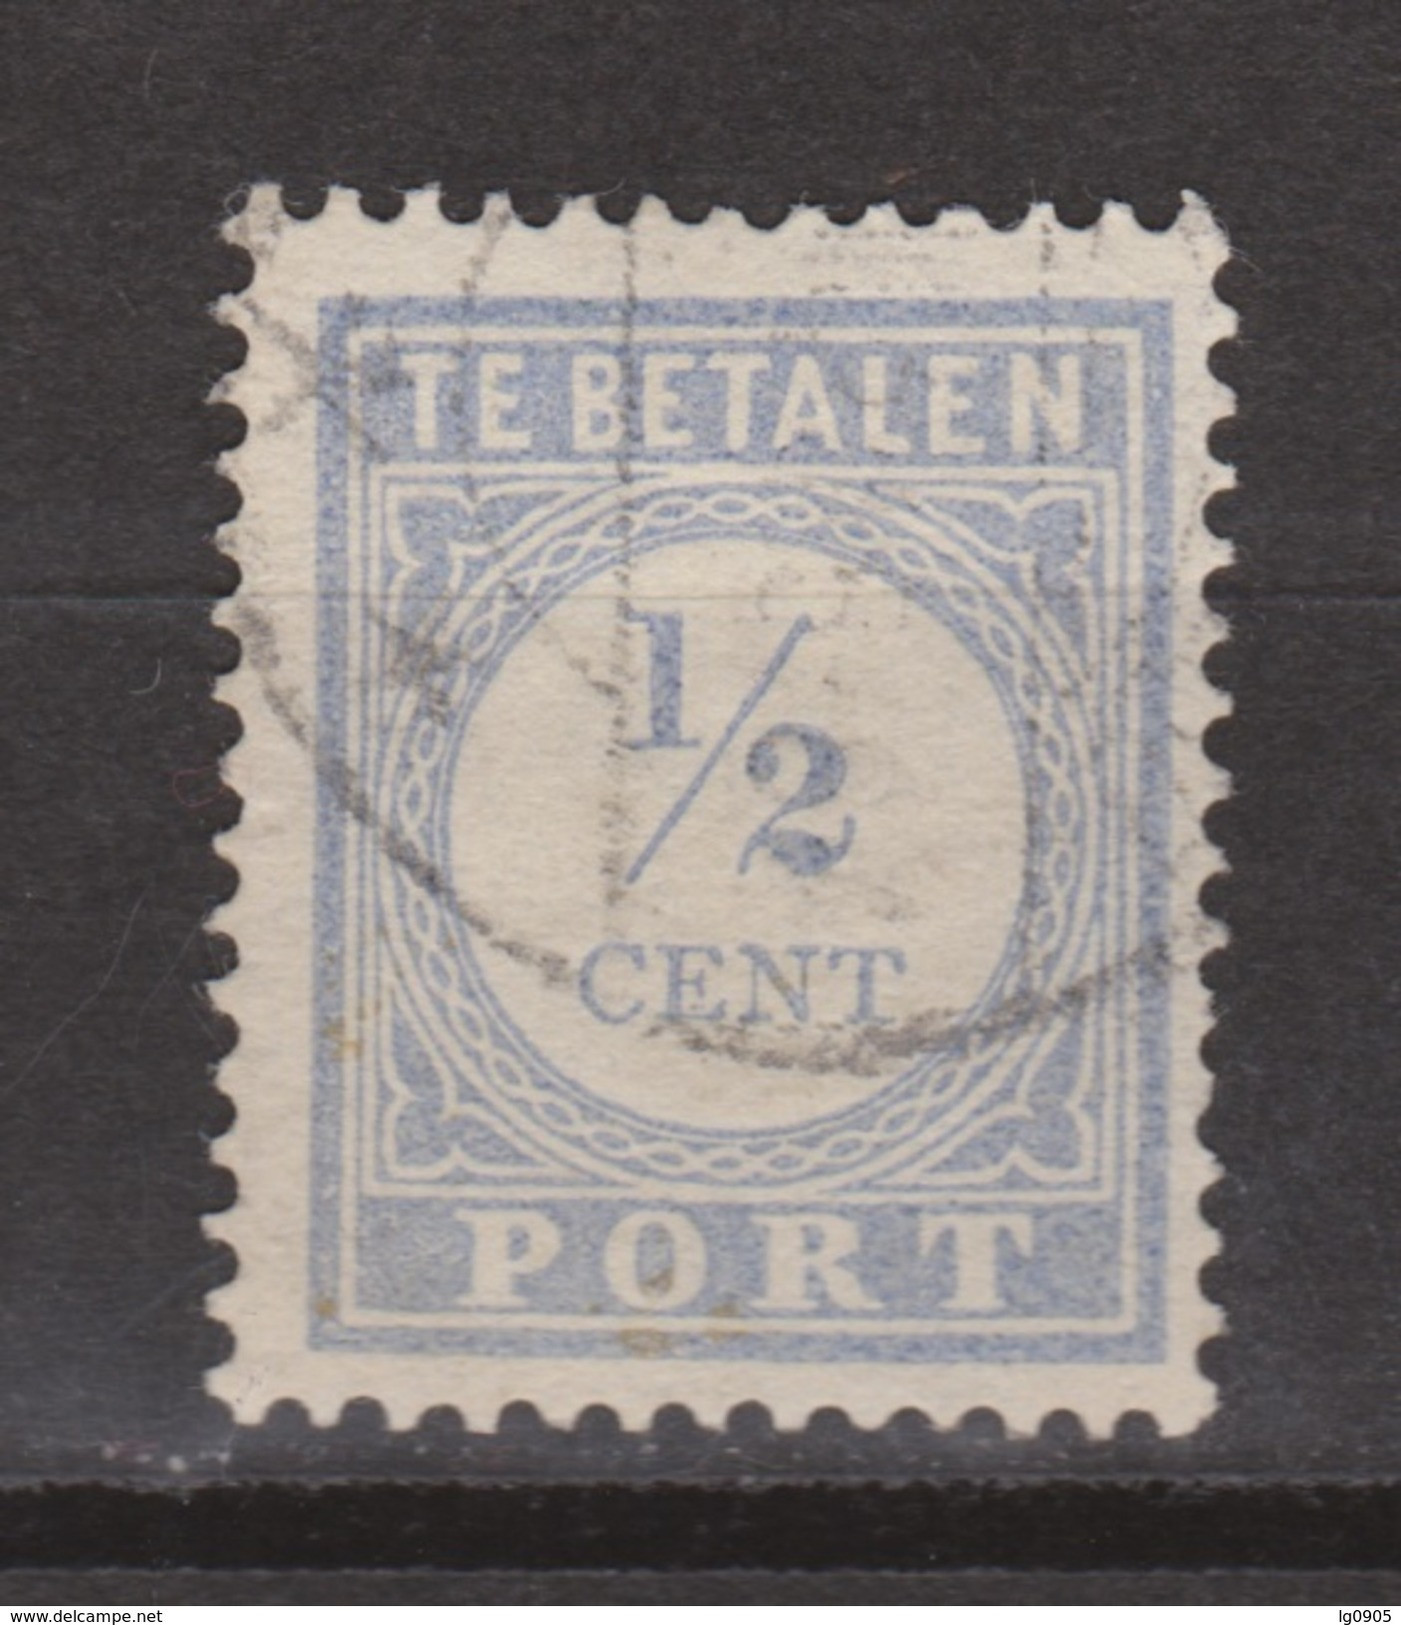 NVPH Nederland Netherlands Holanda Pays Bas Port 44 Used Timbre-taxe Postmarke Sellos De Correos NOW MANY DUE STAMPS - Taxe